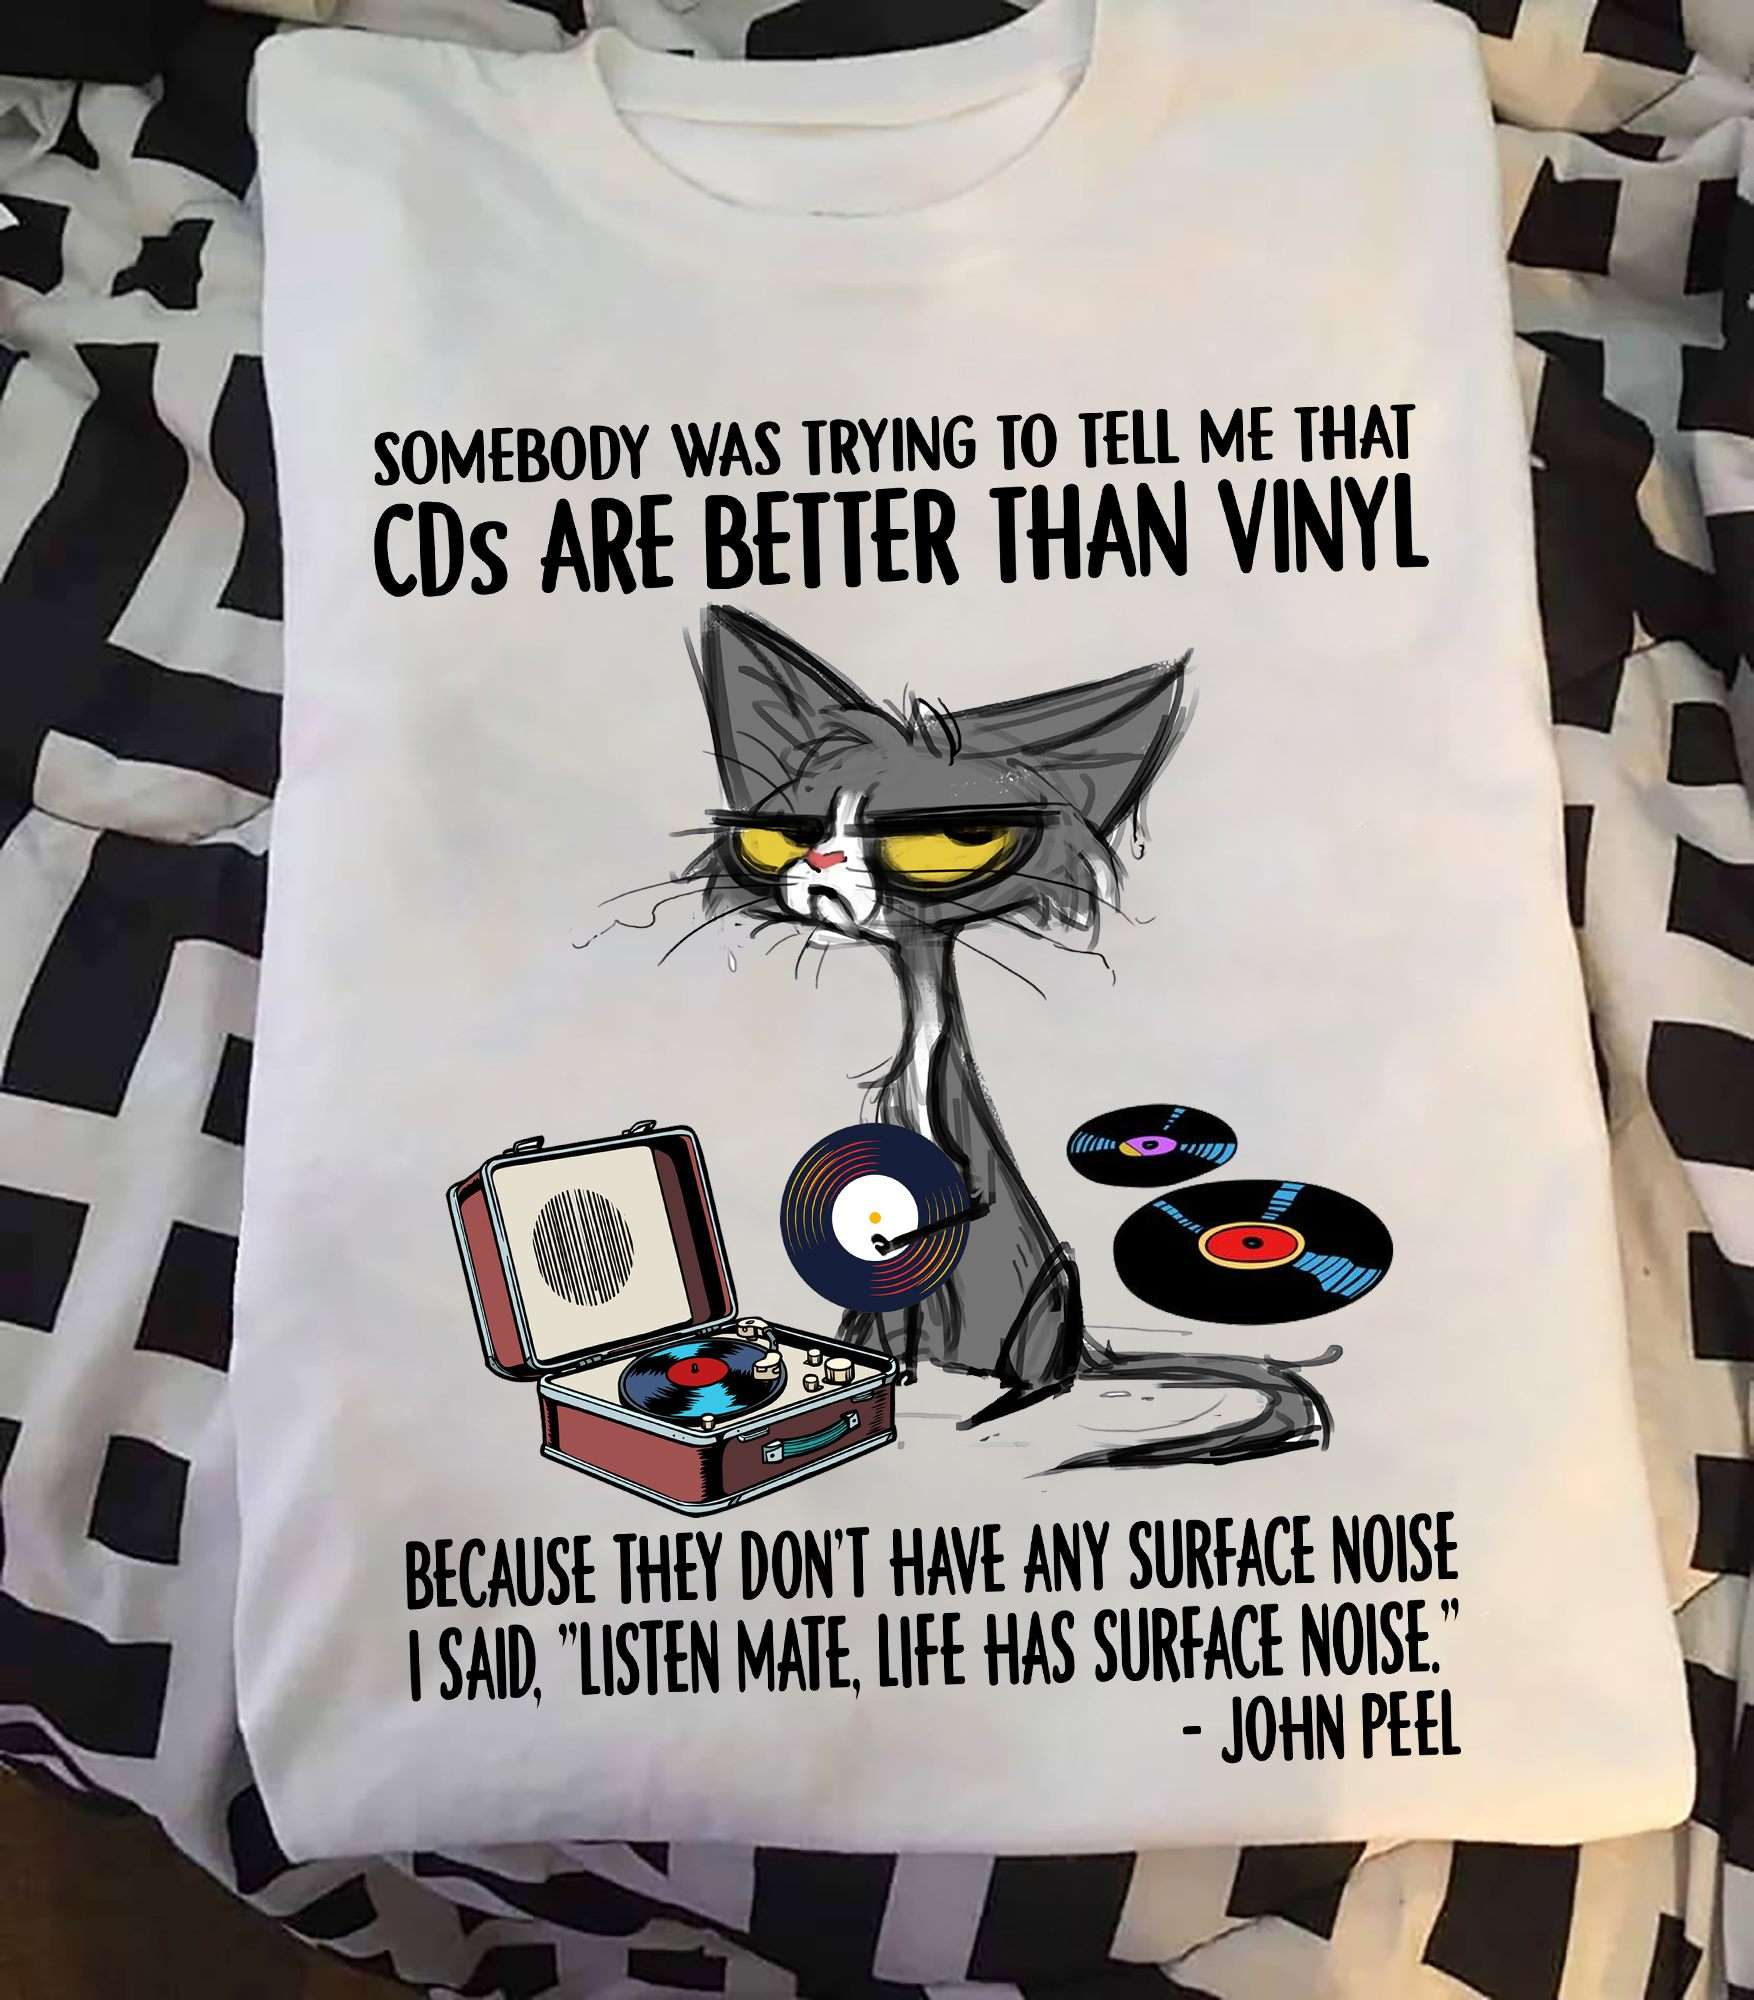 Somebody was trying to tell me that CDs are better than vinyl - cat and vinyl, love listening to vinyl record